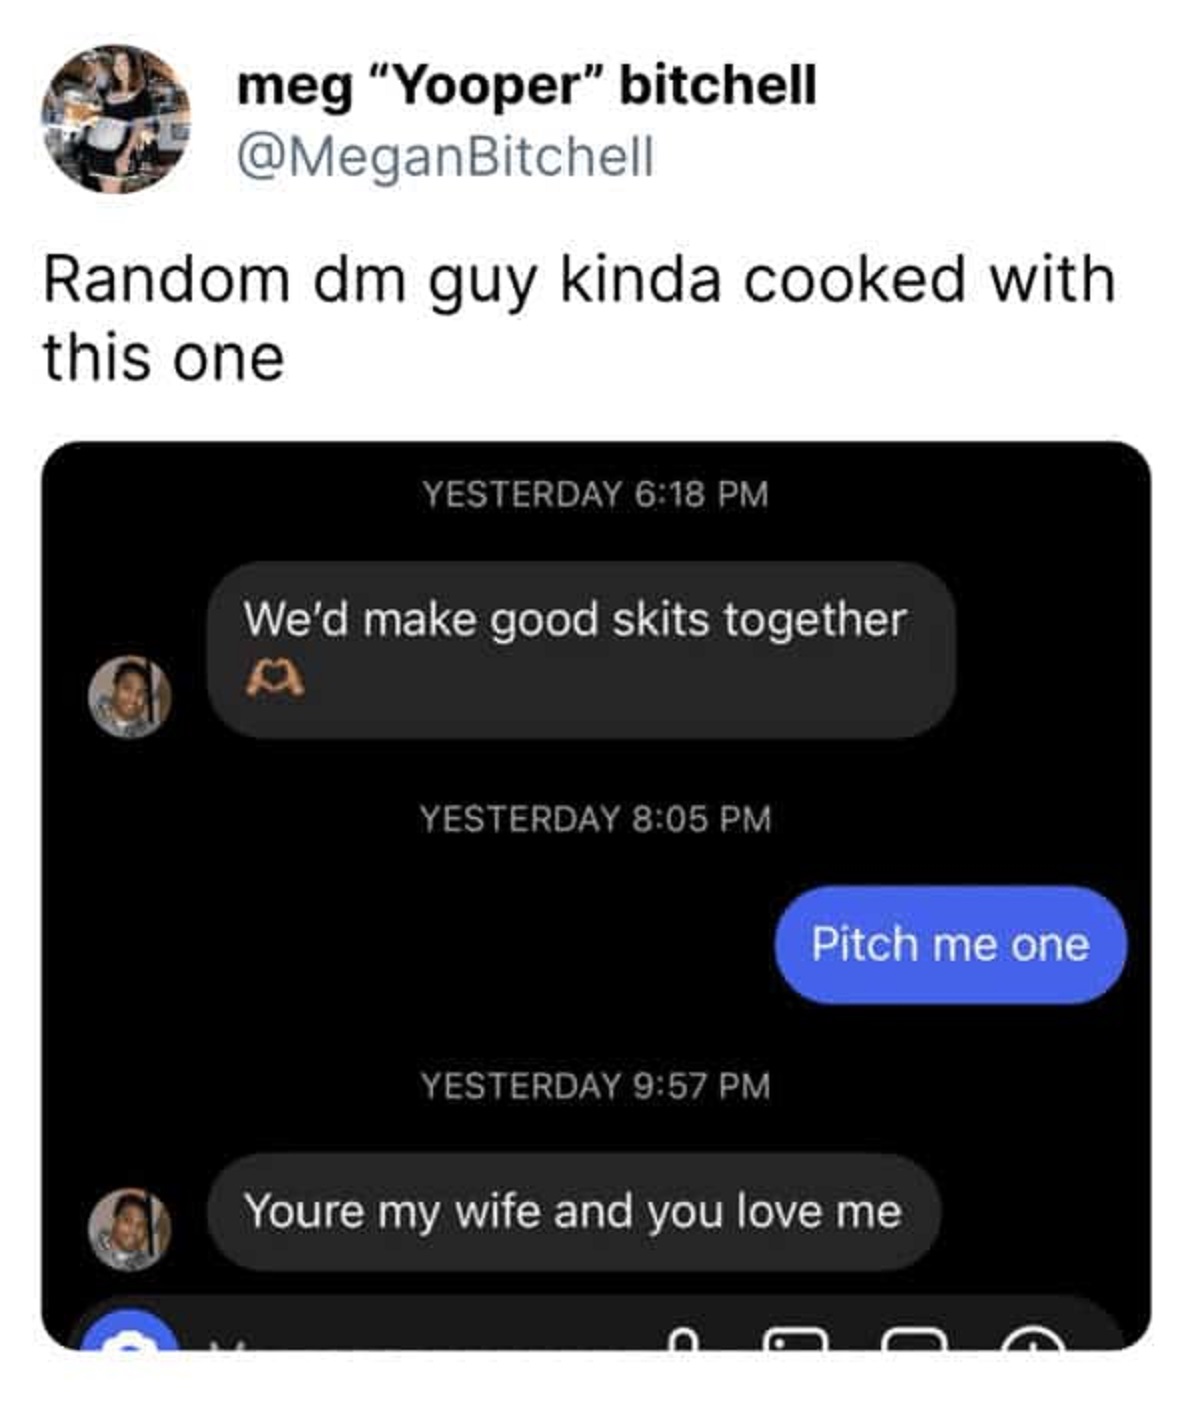 screenshot - meg "Yooper" bitchell Random dm guy kinda cooked with this one Yesterday We'd make good skits together a Yesterday Yesterday Pitch me one Youre my wife and you love me